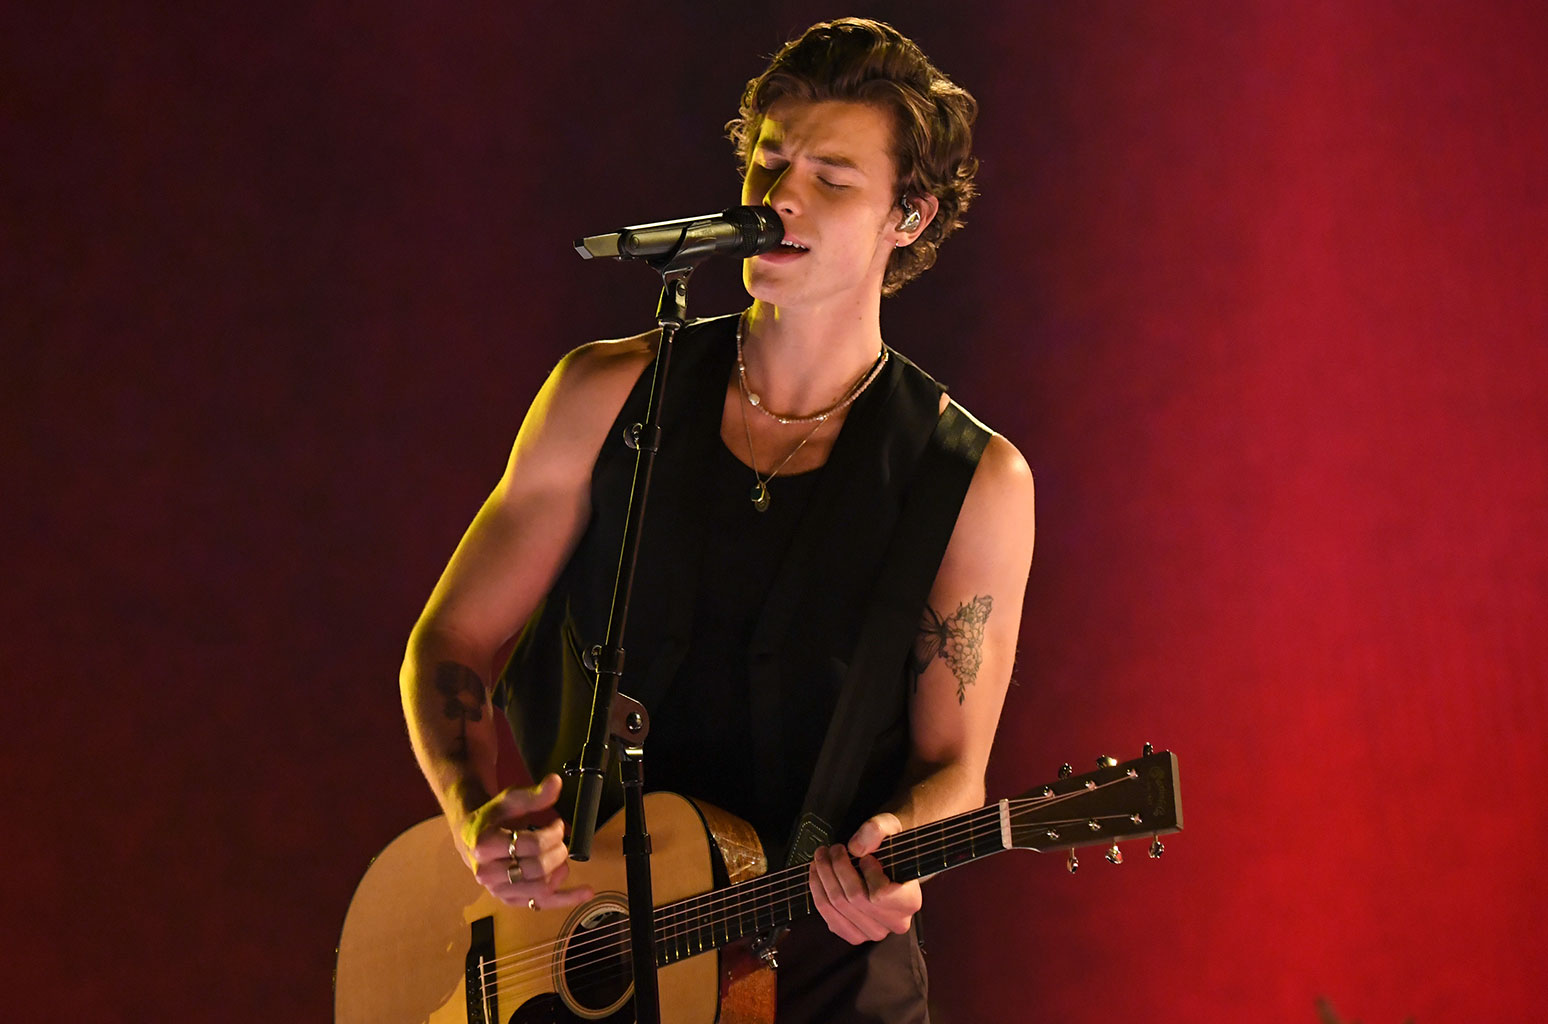 Shawn Mendes Tour Wraps 2019 With More Than 1.3 Million Tickets Sold